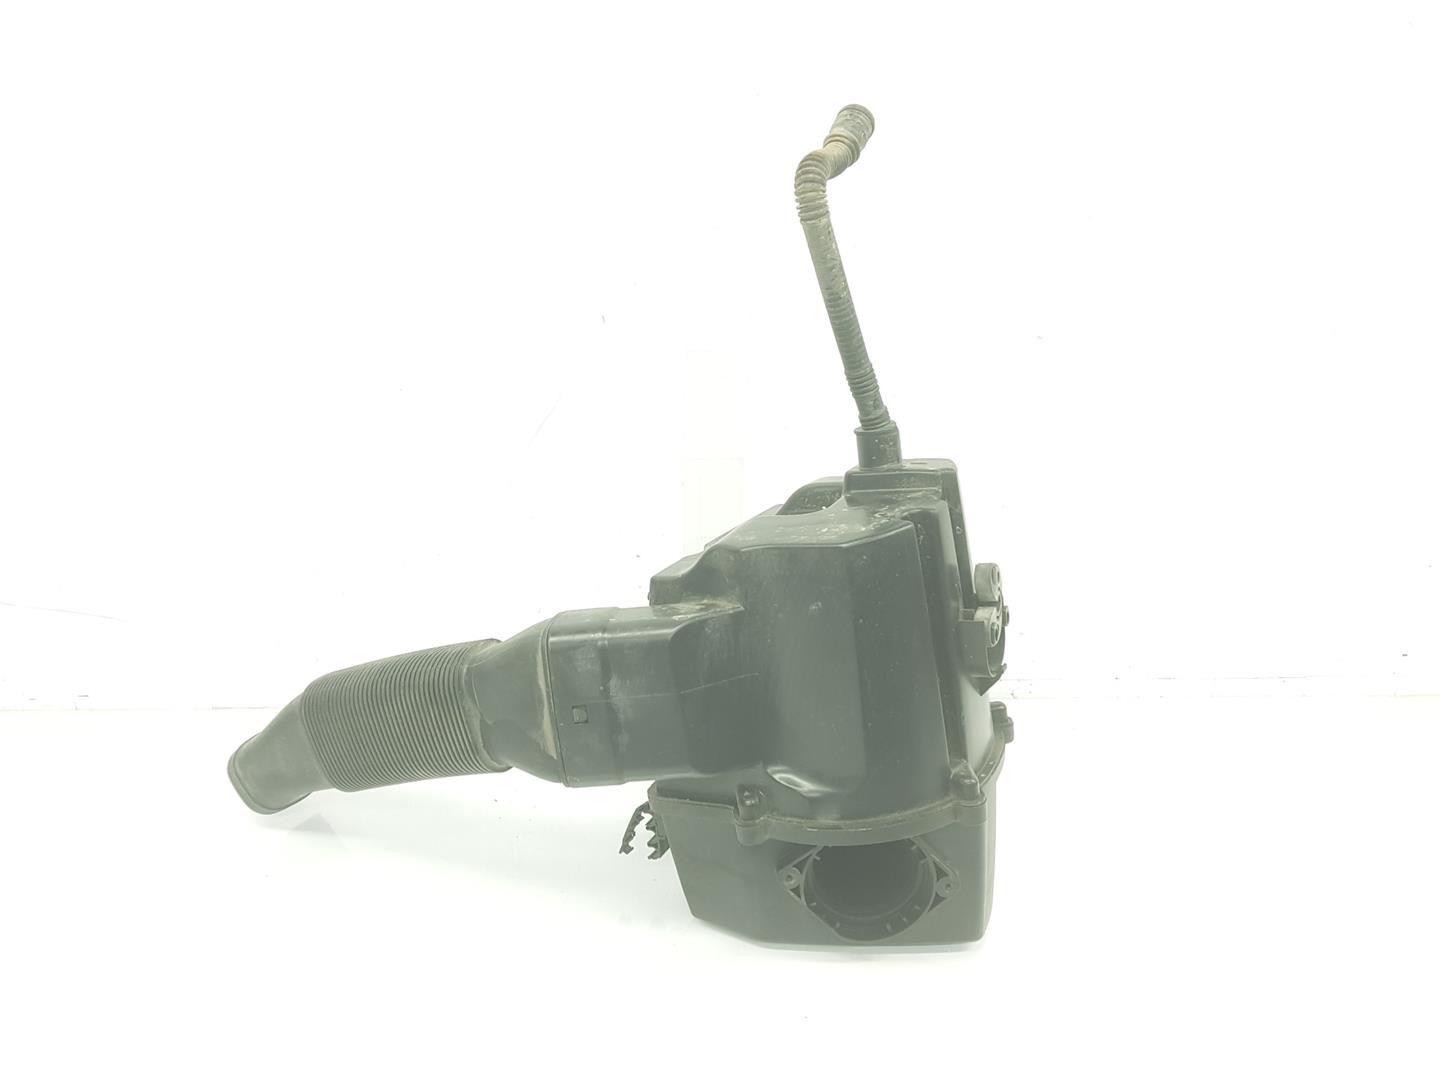 SEAT Ibiza 4 generation (2008-2017) Other Engine Compartment Parts 6R0129607E, 6R0129601C 19781734